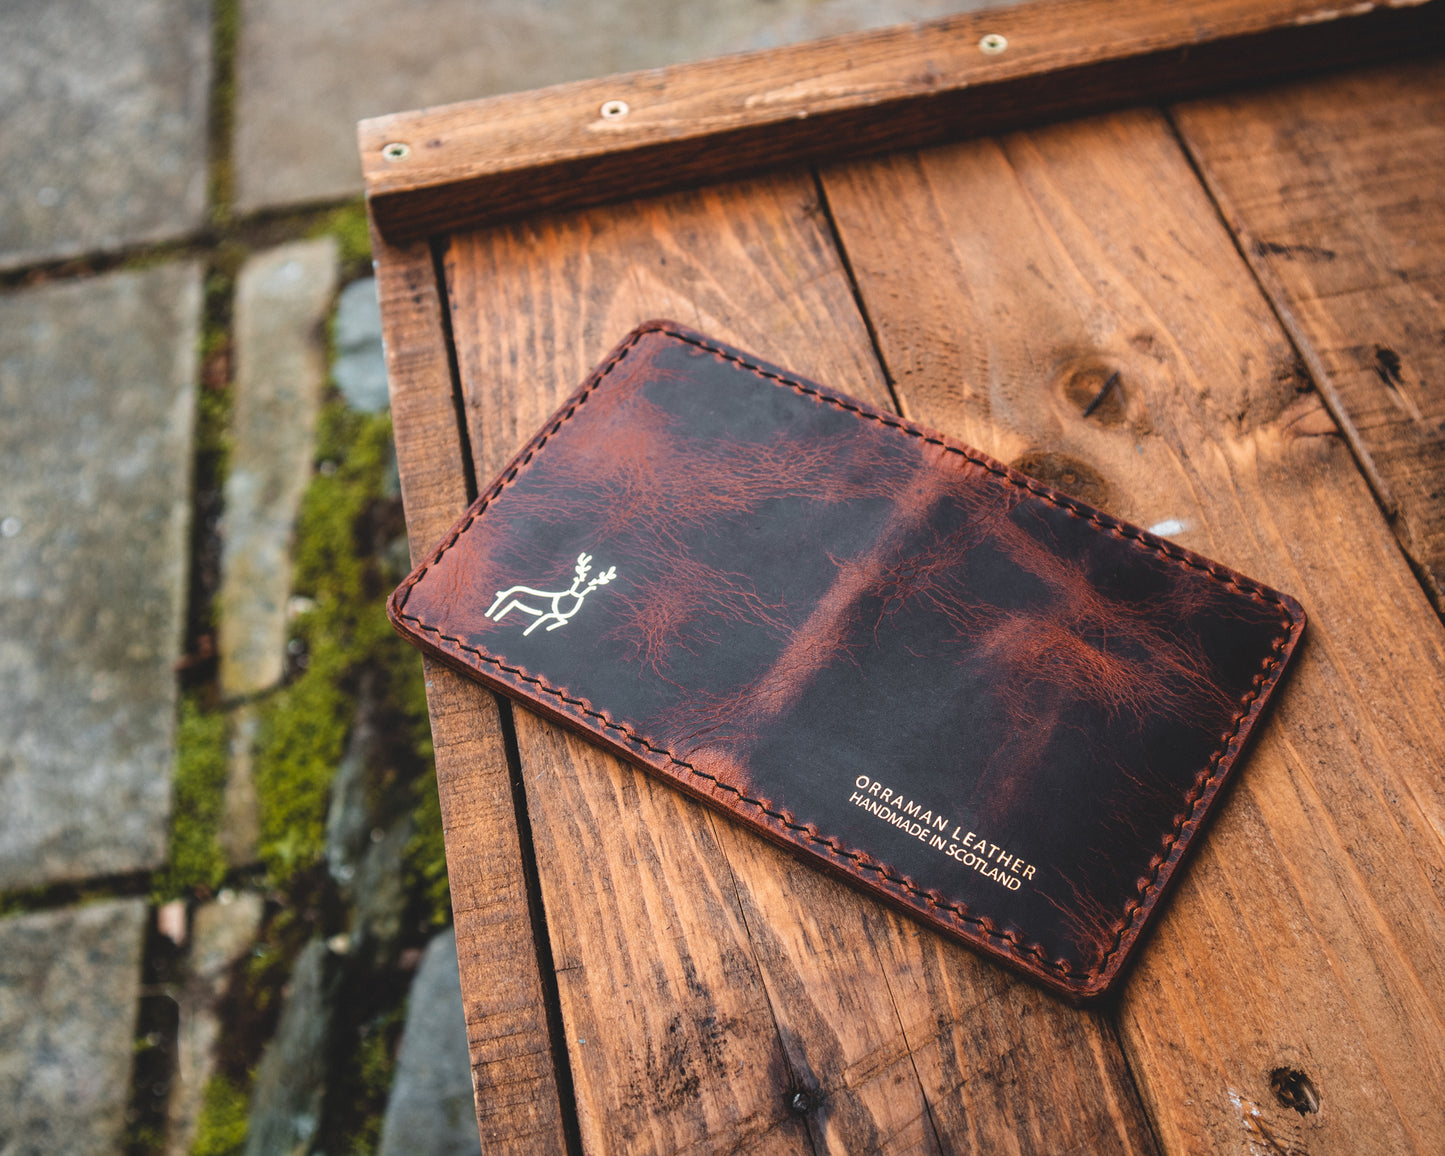 Limited Edition! - The Nevis wallet, Silver Mist and Dark Cognac.